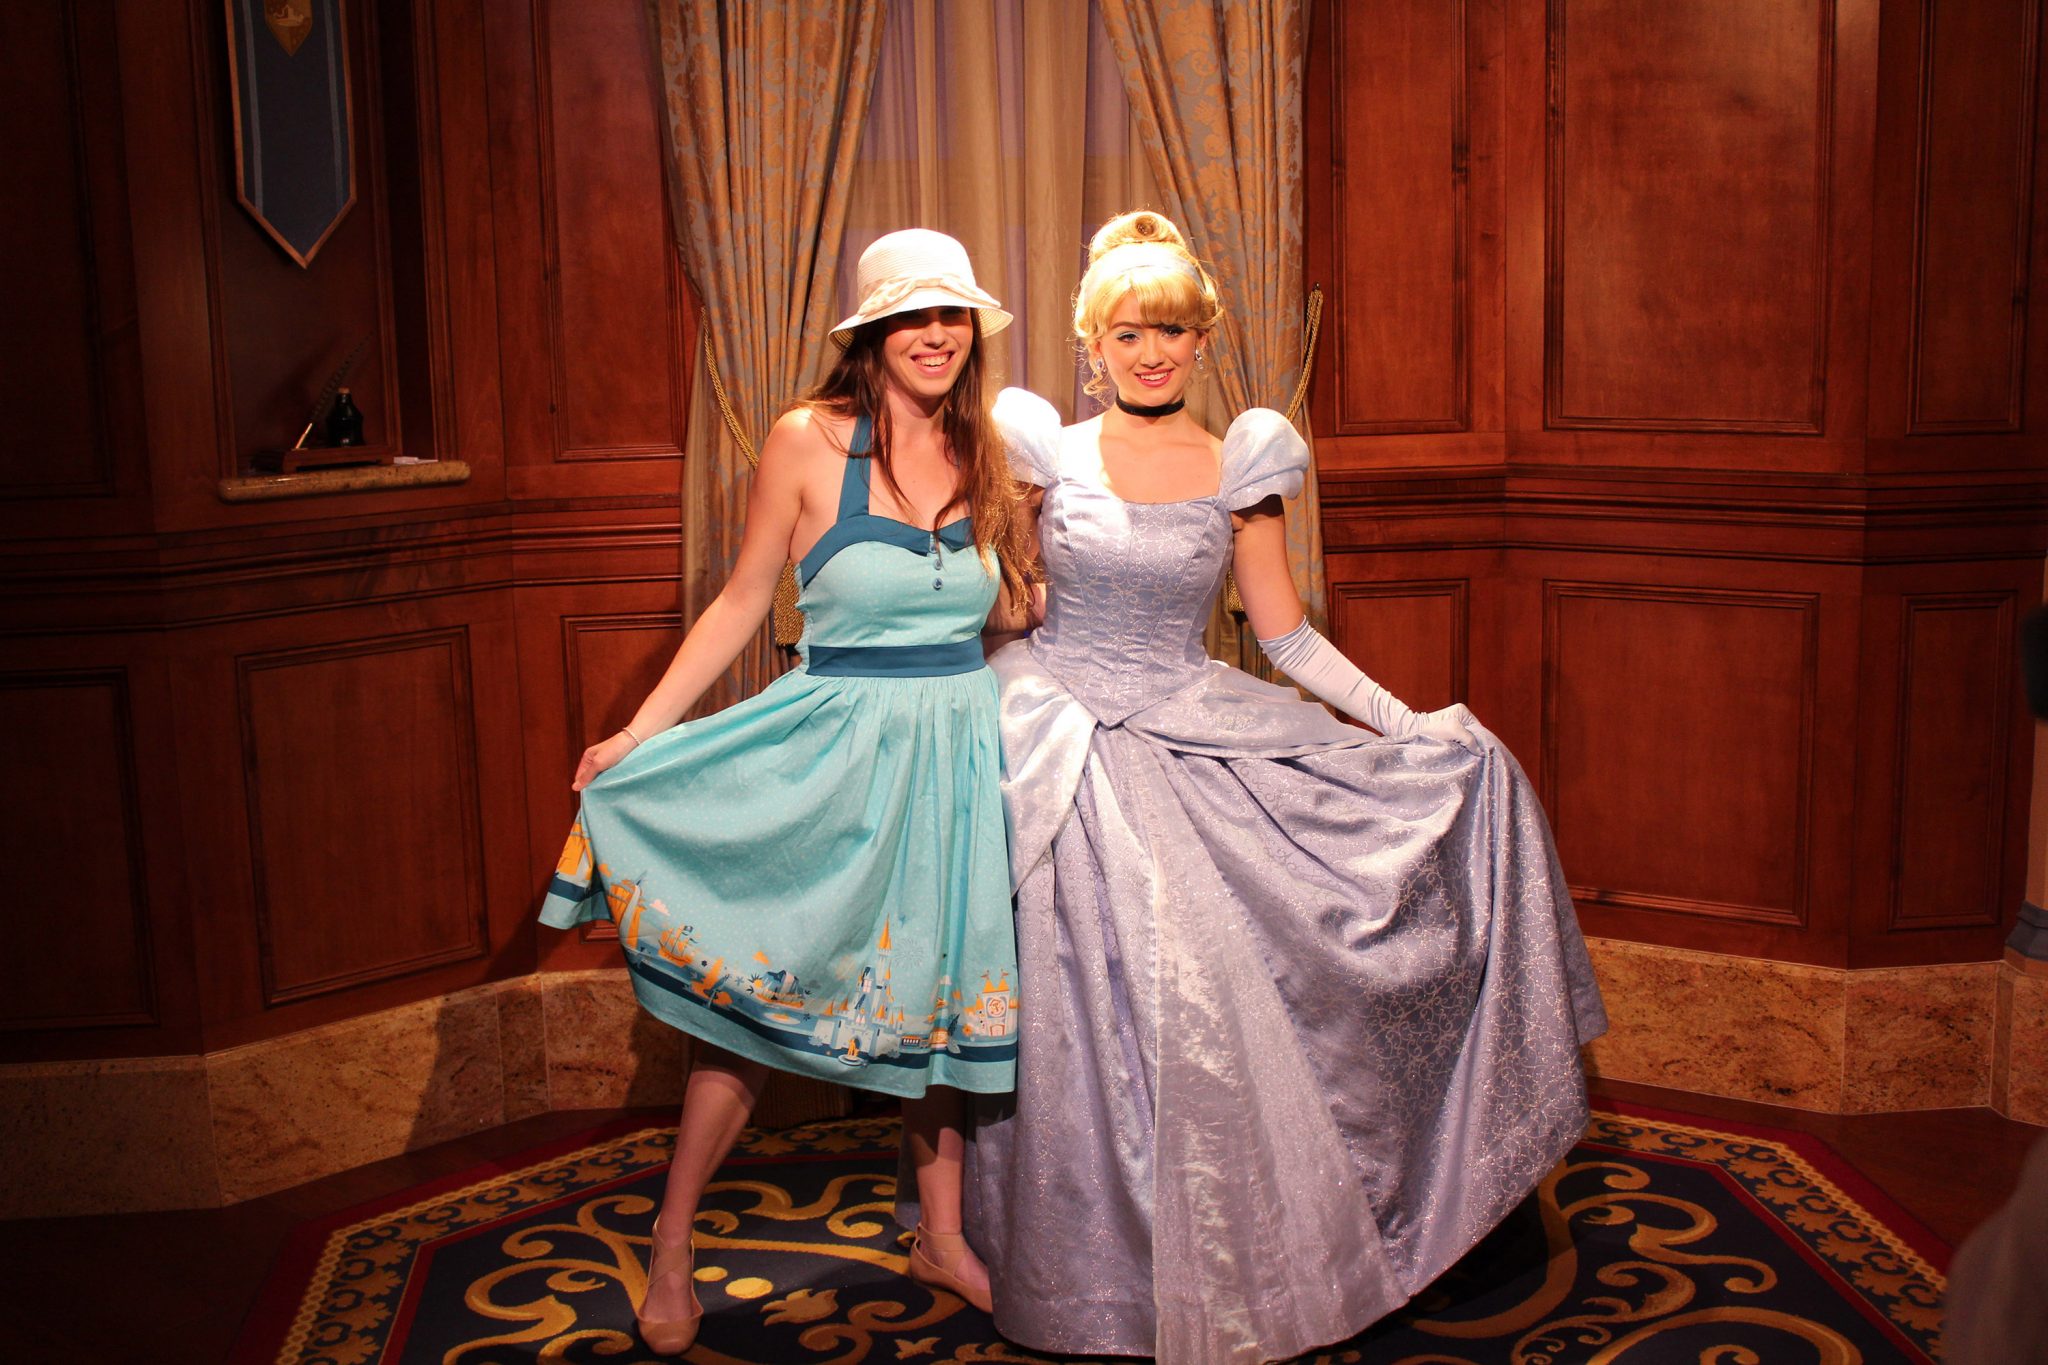 Chelsea in her Dapper Day dress at Princess Fairy Tale Hall with Cinderella.